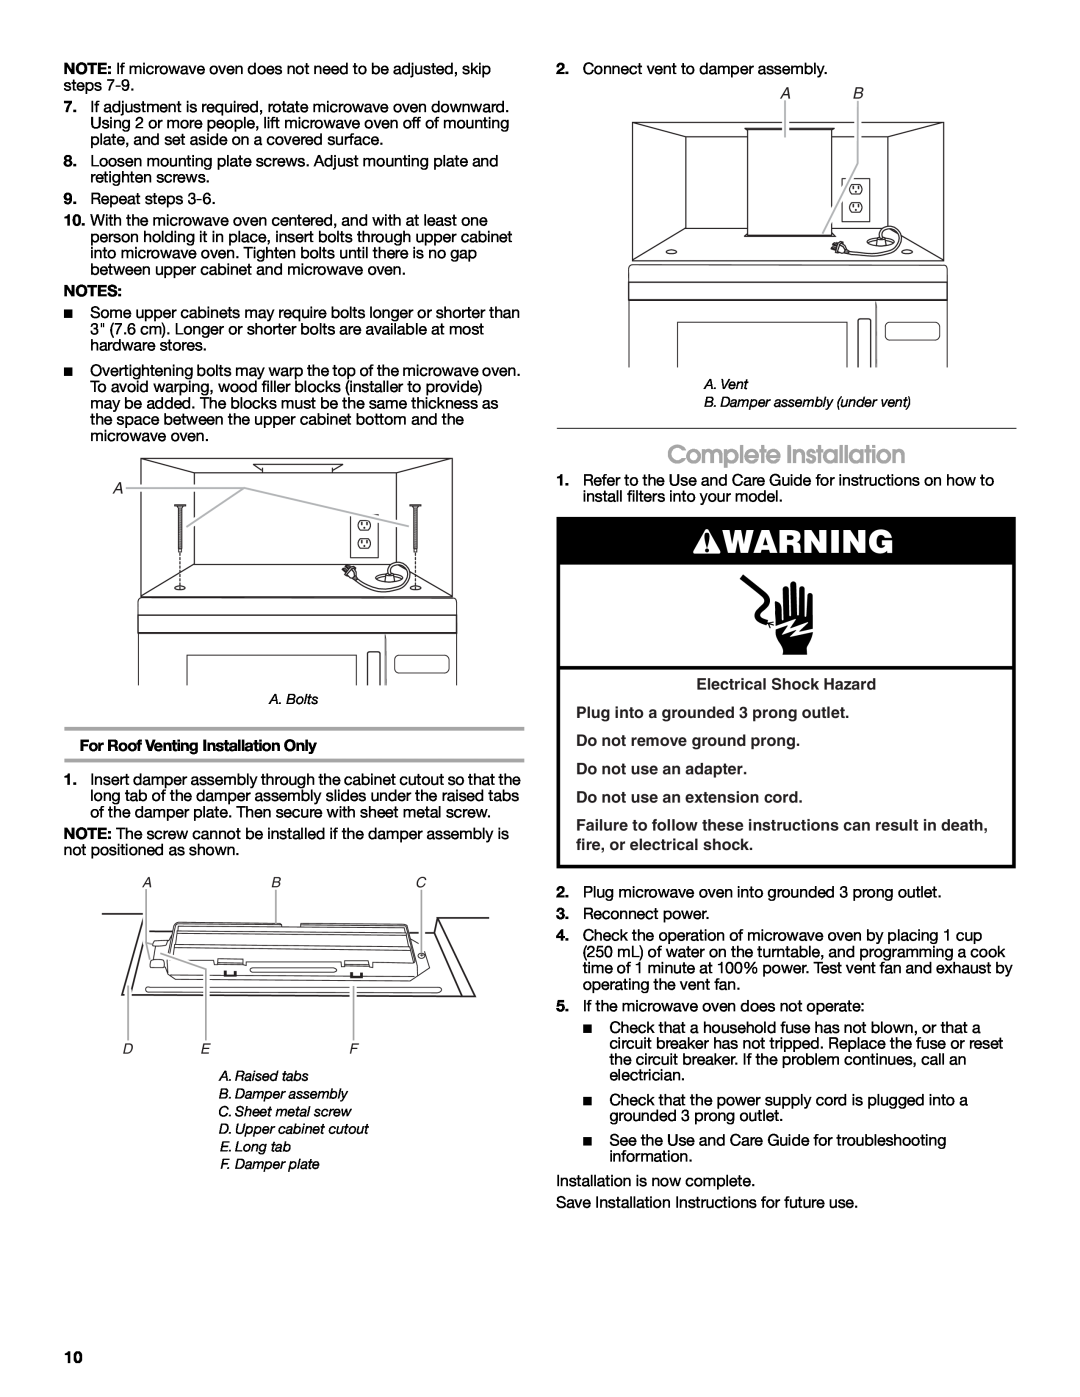 Maytag W10191953A Complete Installation, For Roof Venting Installation Only, Electrical Shock Hazard 